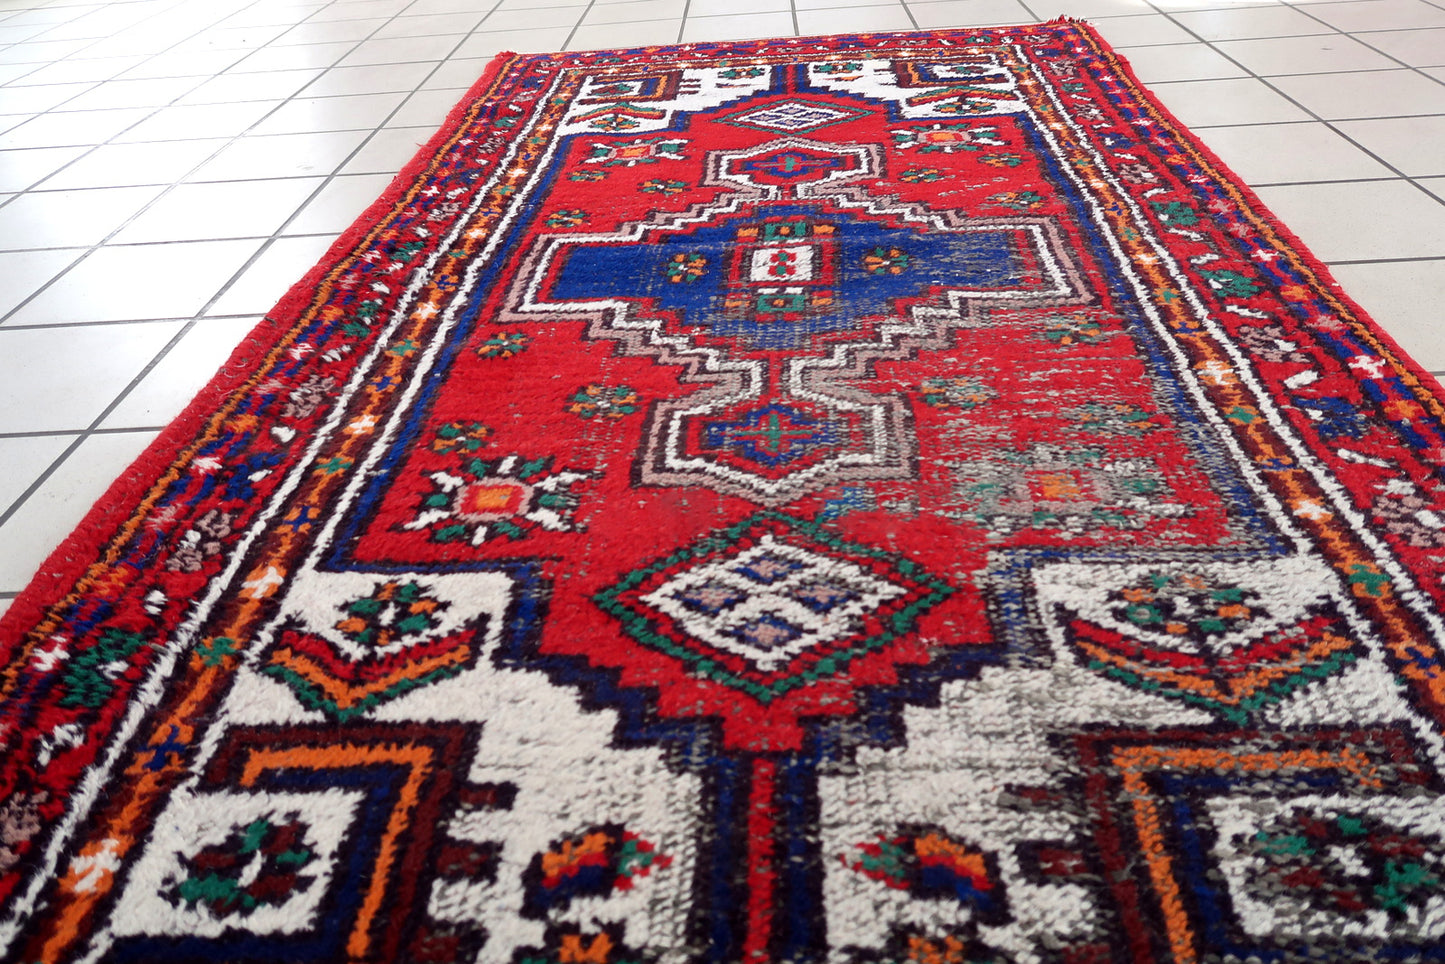 Handmade vintage Persian Hamadan rug in bright colors. The rug is from the end of 20th century in distressed condition.